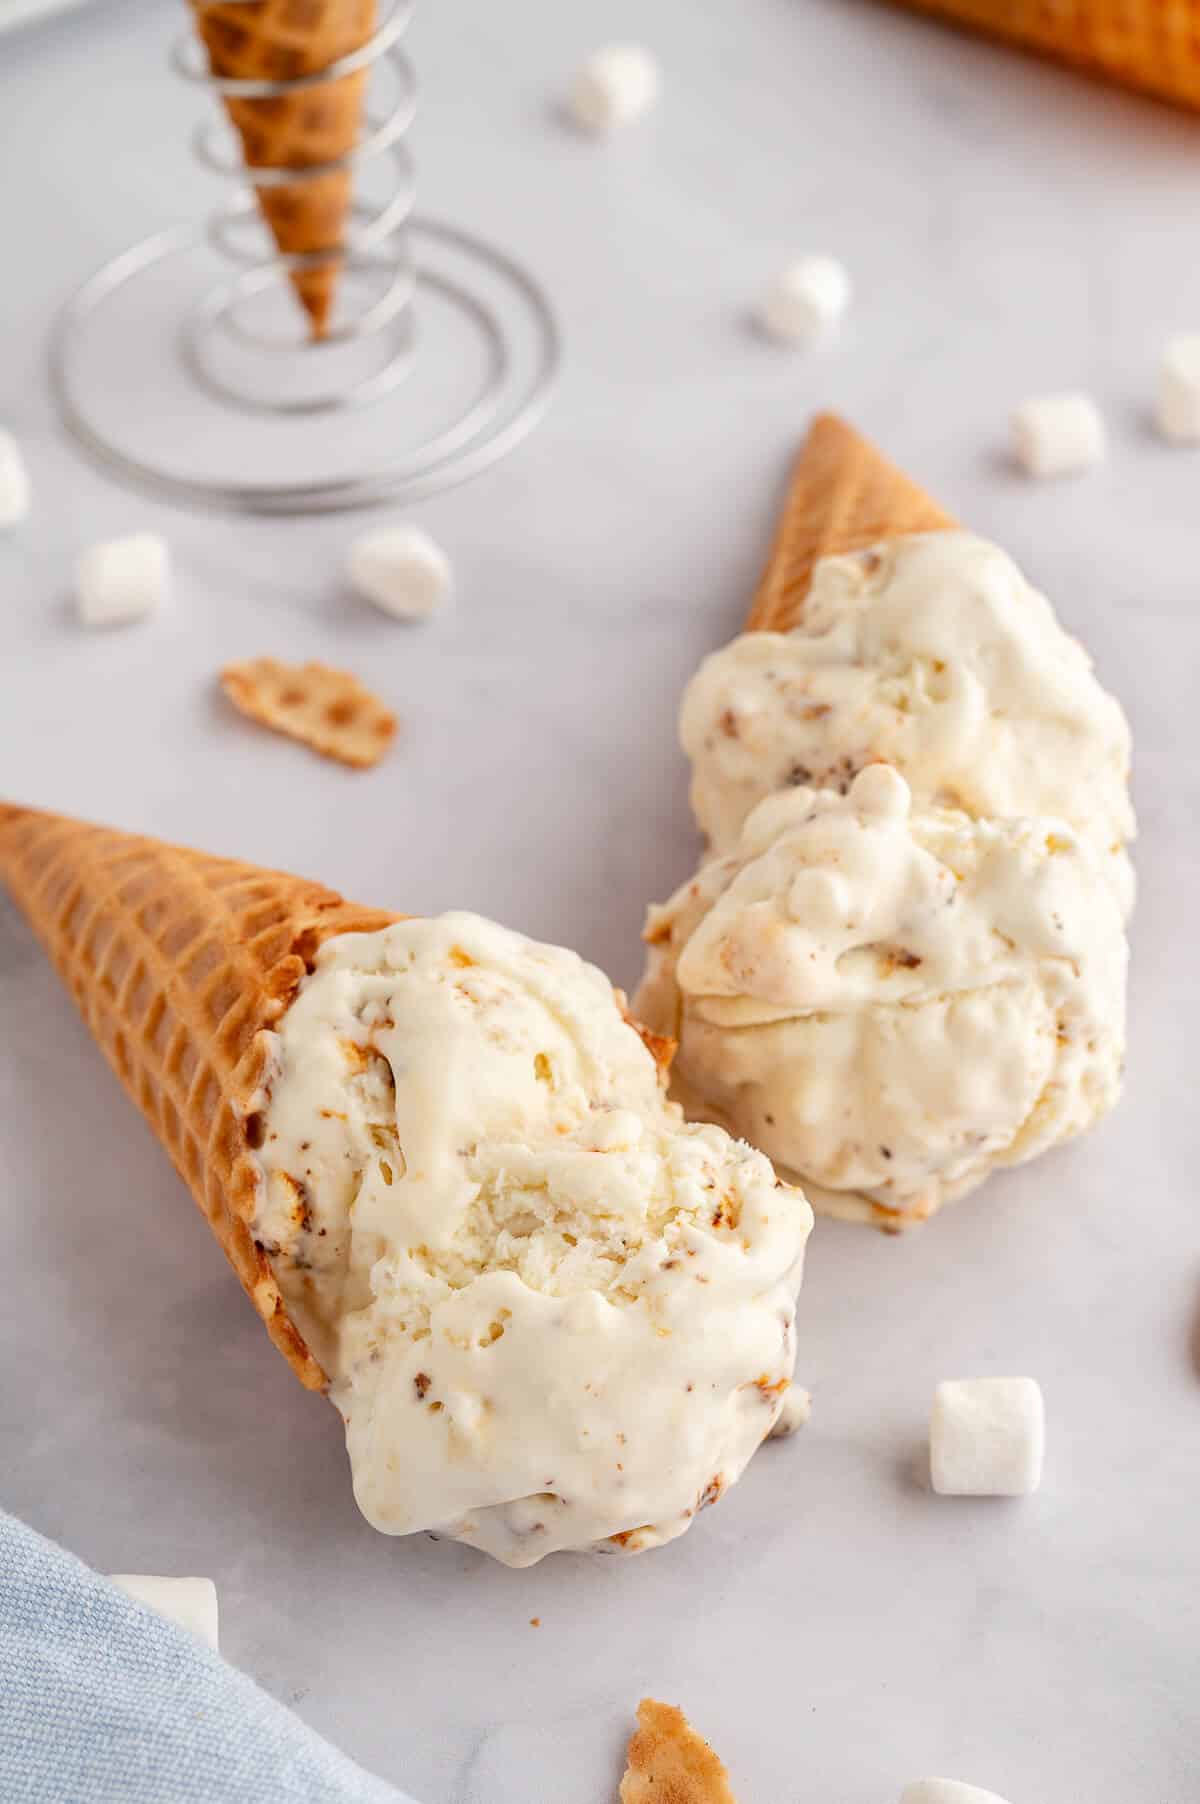 Two ice cream cones with toasted marshmallow ice cream.